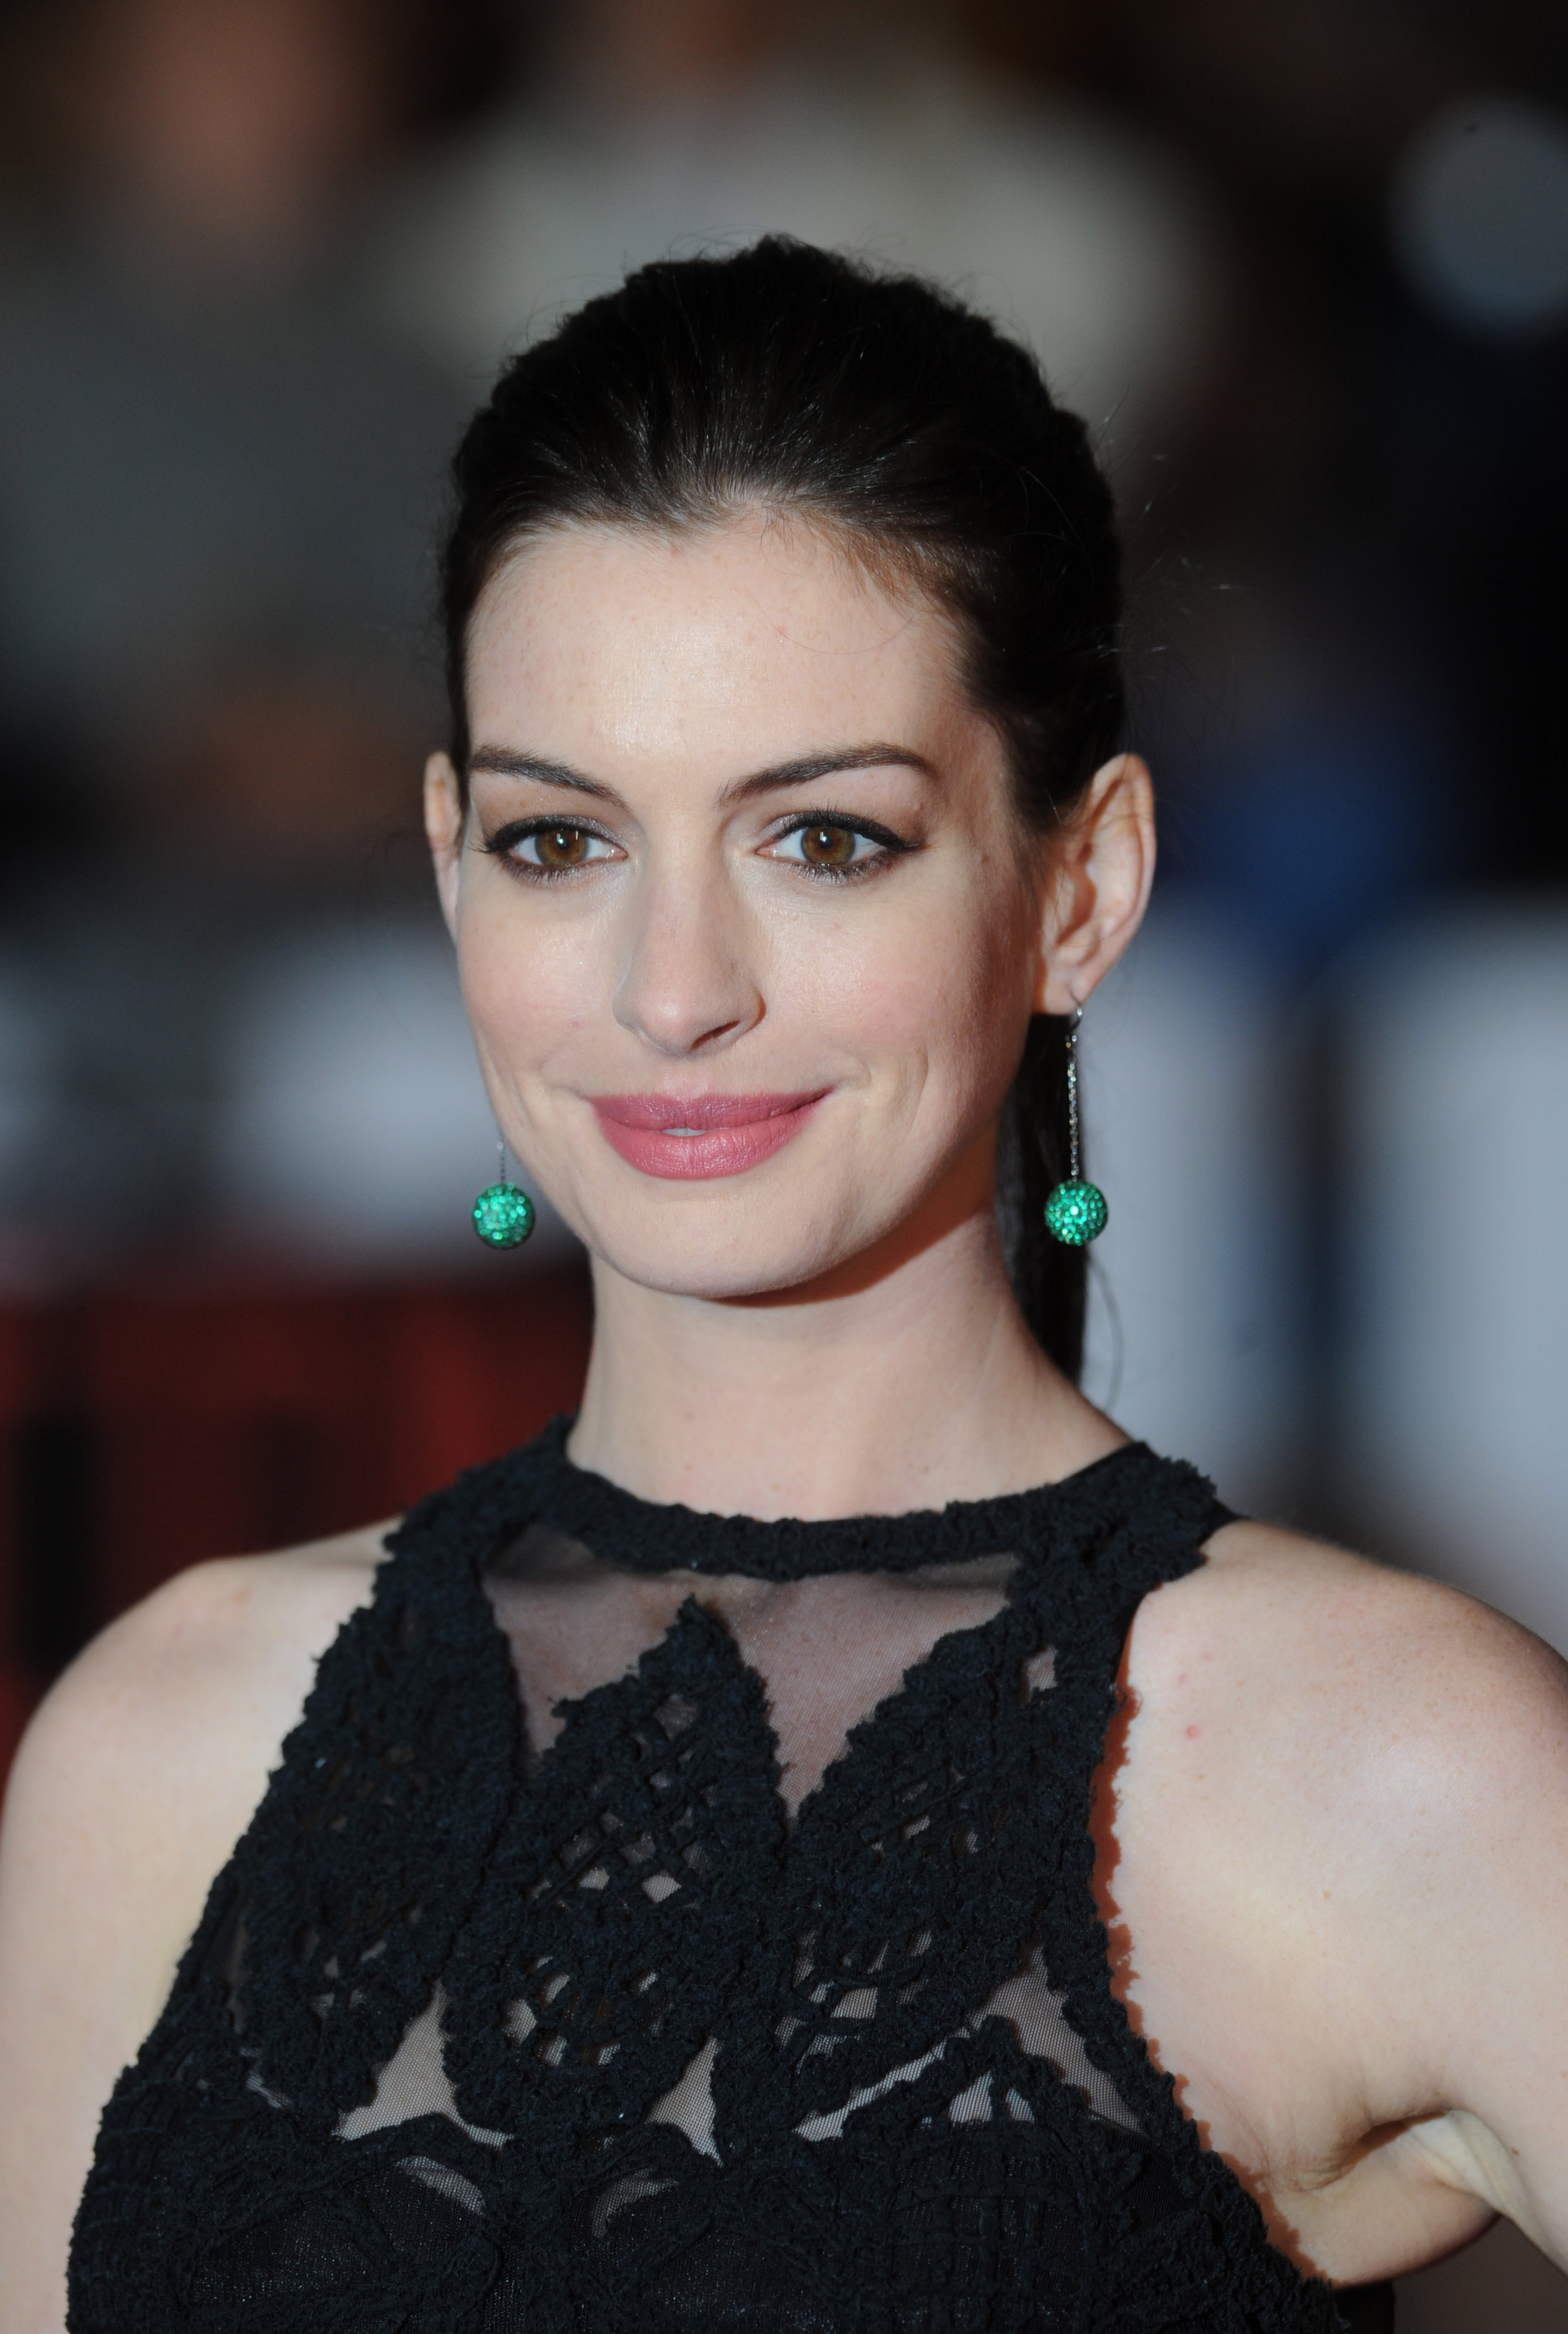 ANNE HATHAWAY at Hollywood Film Awards in Los Angeles 11 